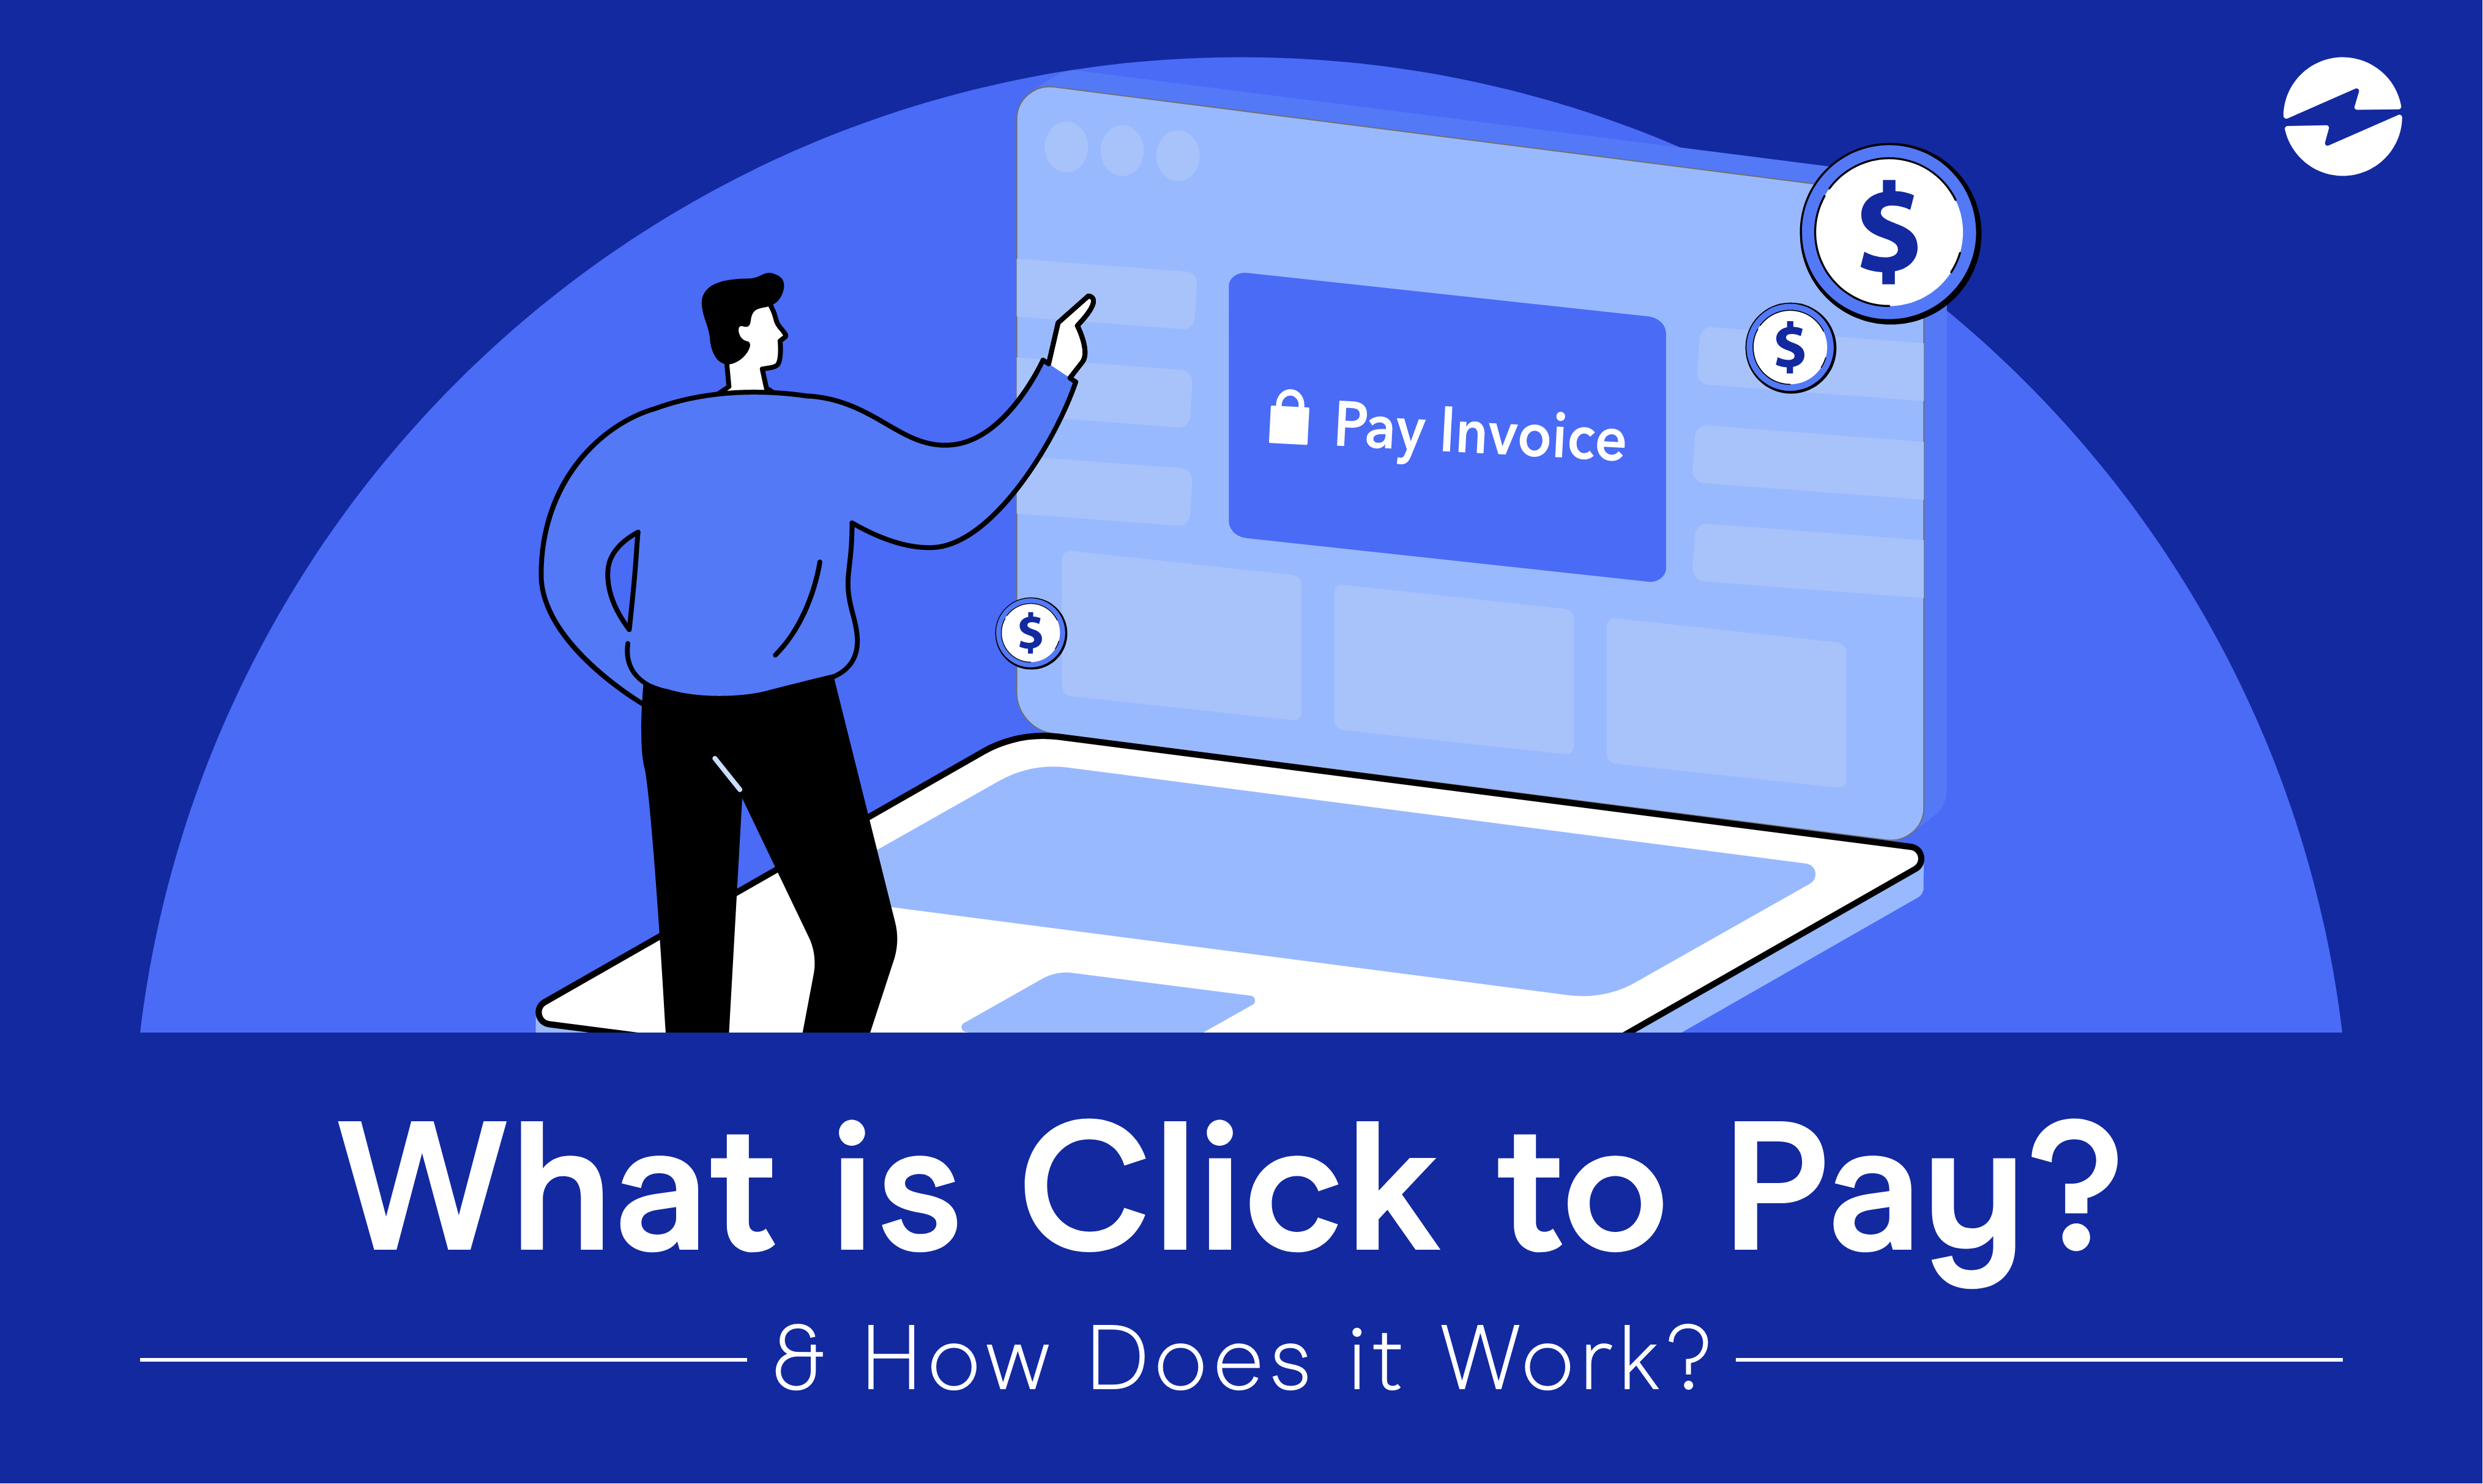 What is click to pay